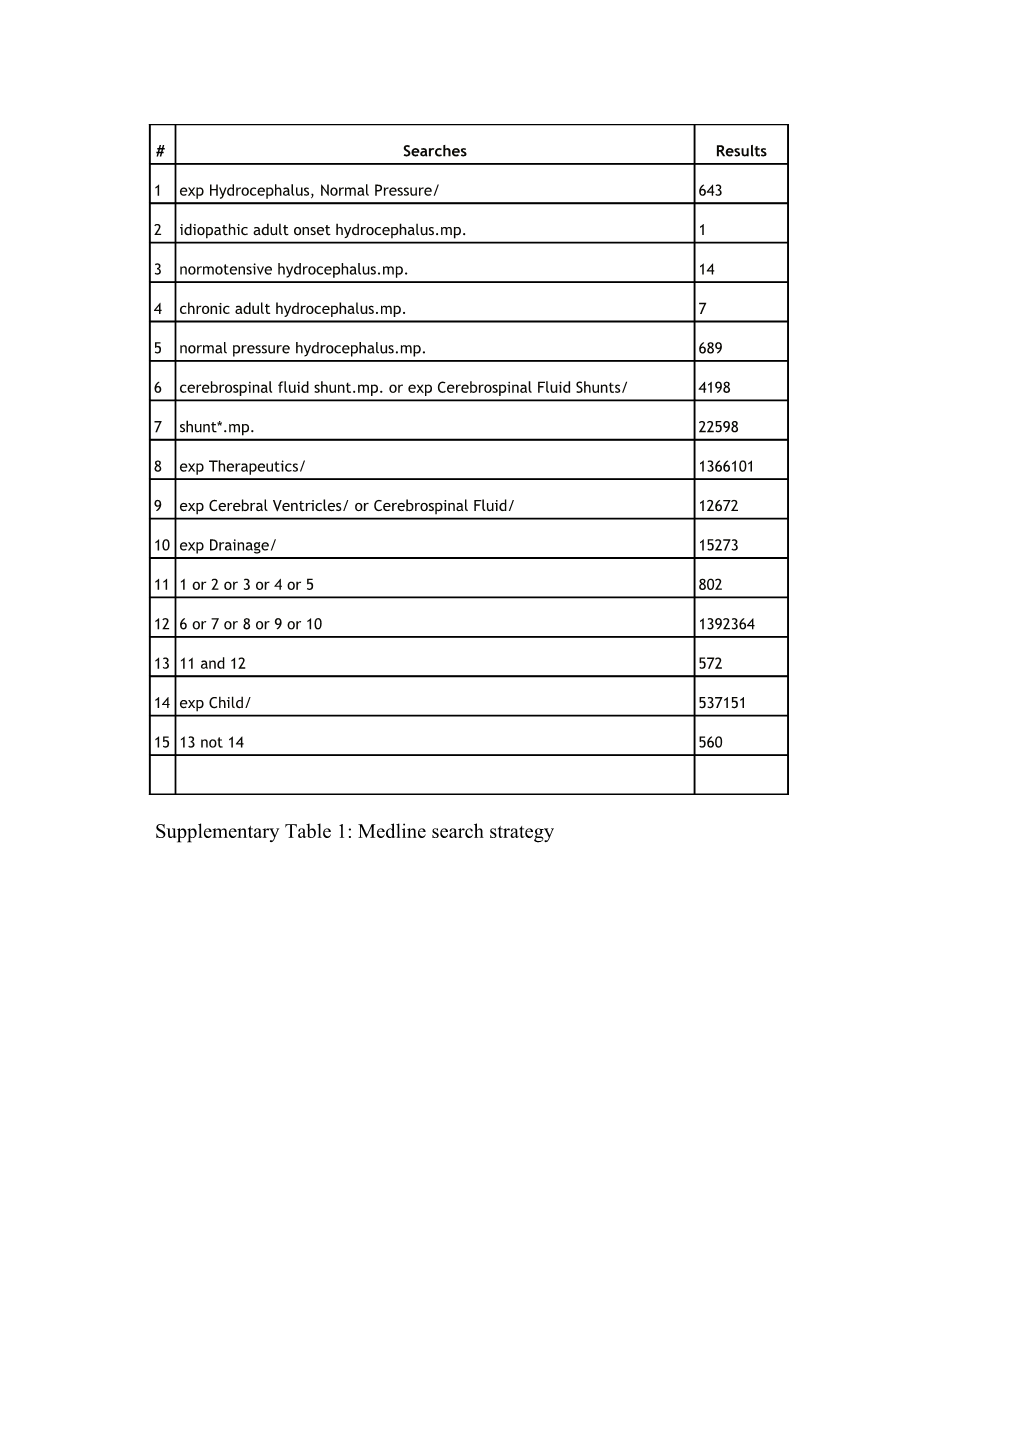 Supplementary Table 1: Medline Search Strategy